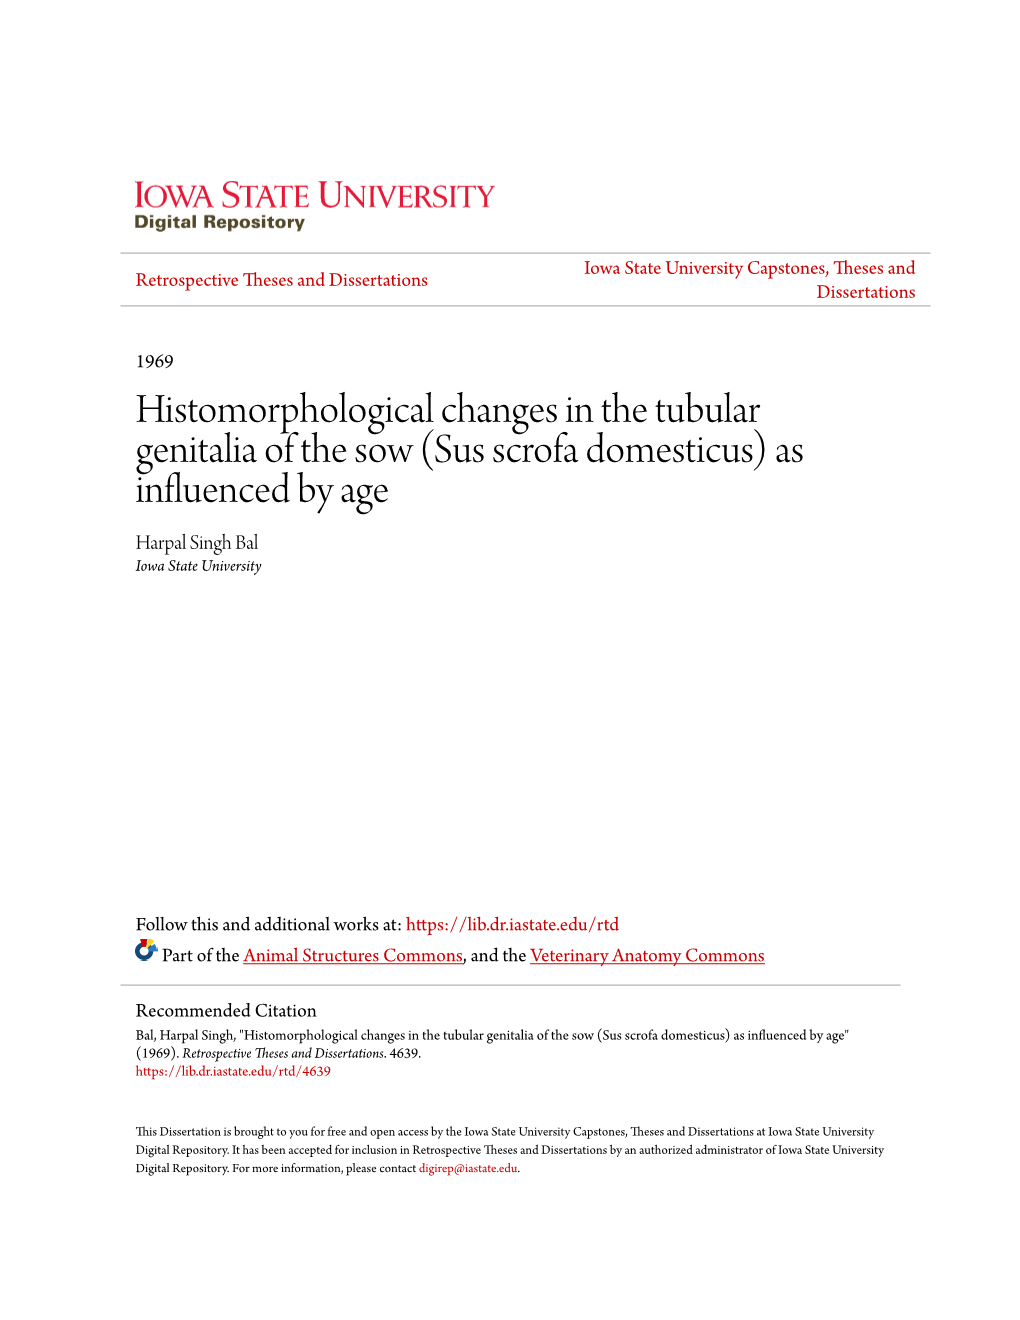 Histomorphological Changes in the Tubular Genitalia of the Sow (Sus Scrofa Domesticus) As Influenced by Age Harpal Singh Bal Iowa State University